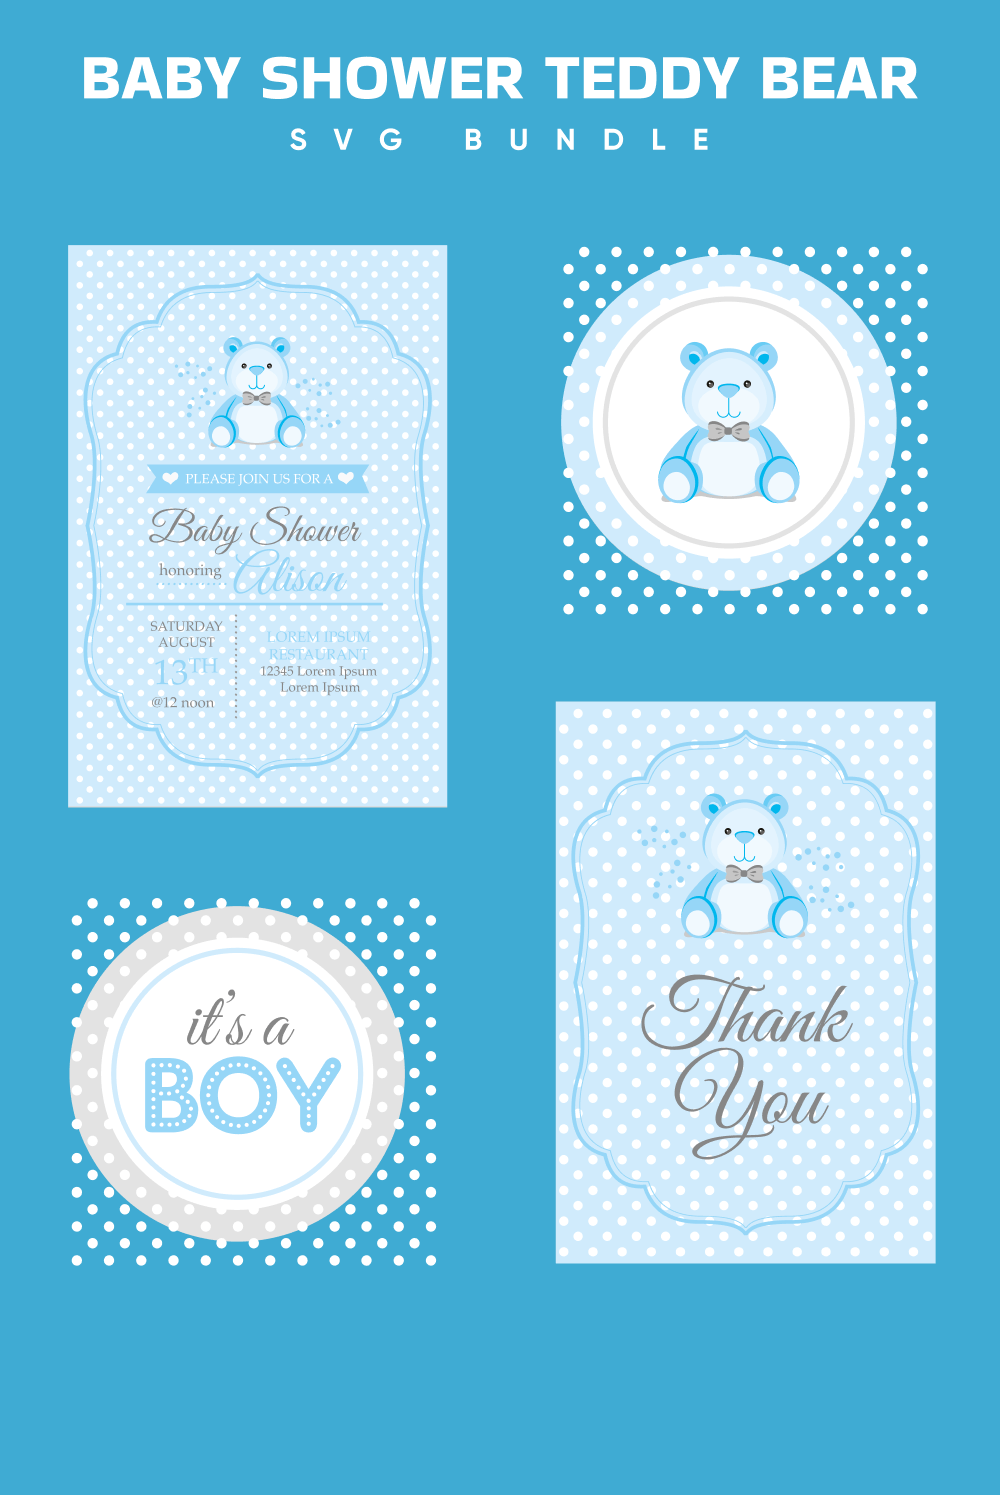 Blue and white baby shower teddy bear themed baby shower.